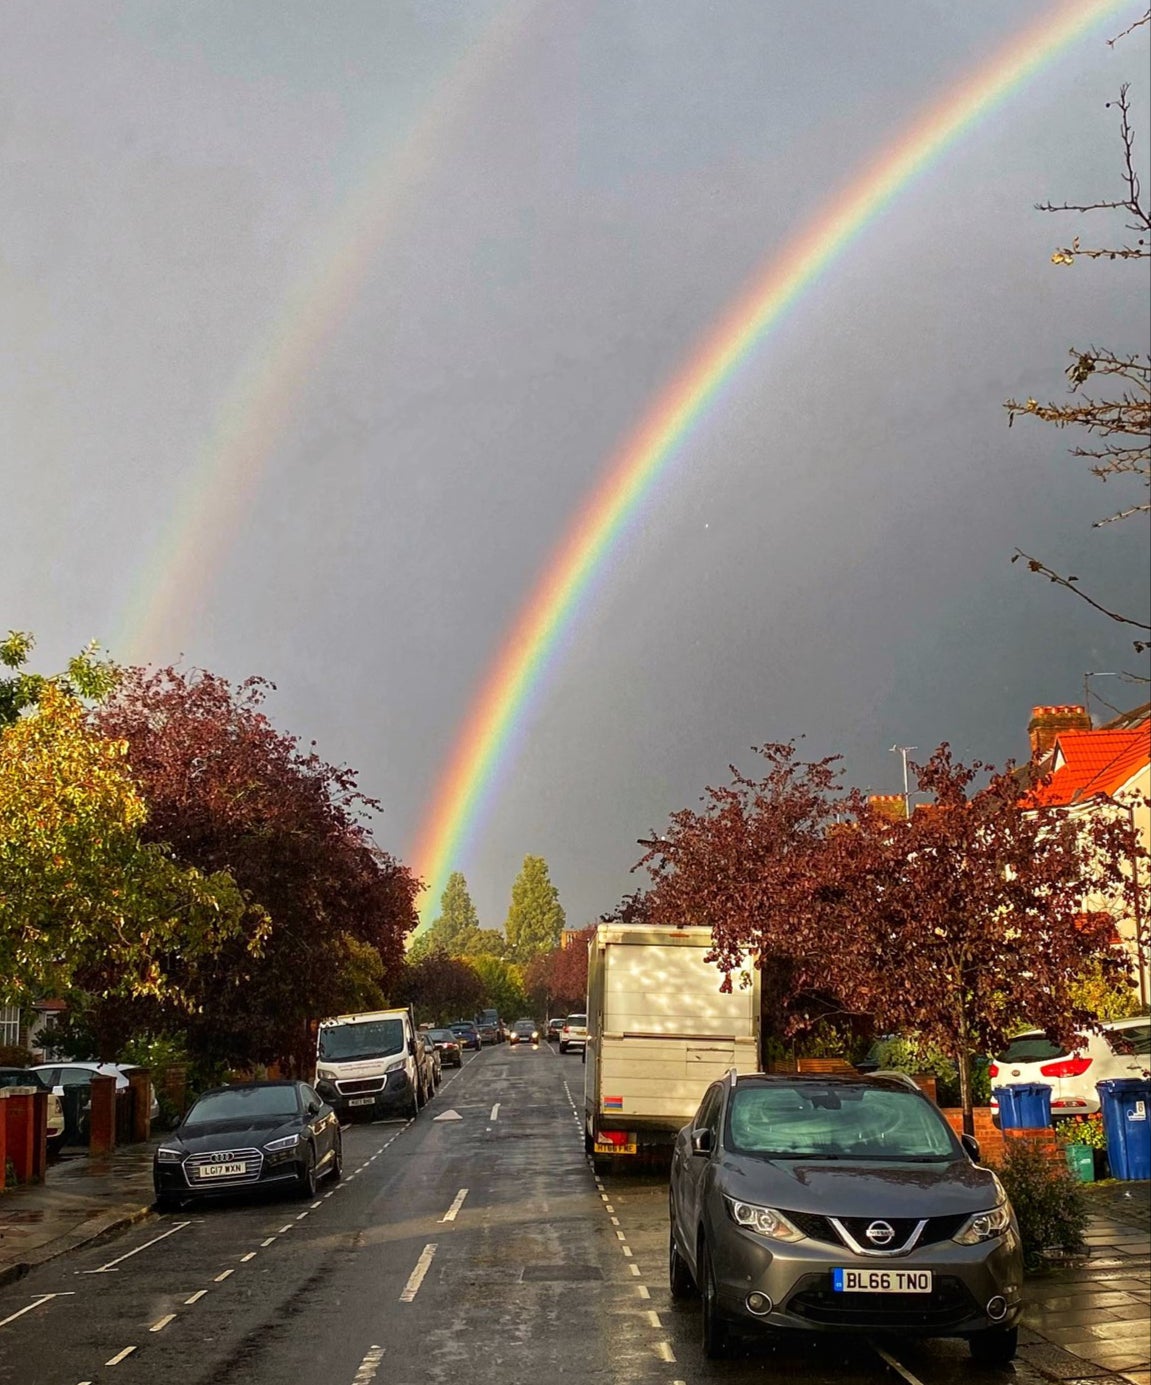 West Londoners spotted a double rainbow as the rain stopped for a moment